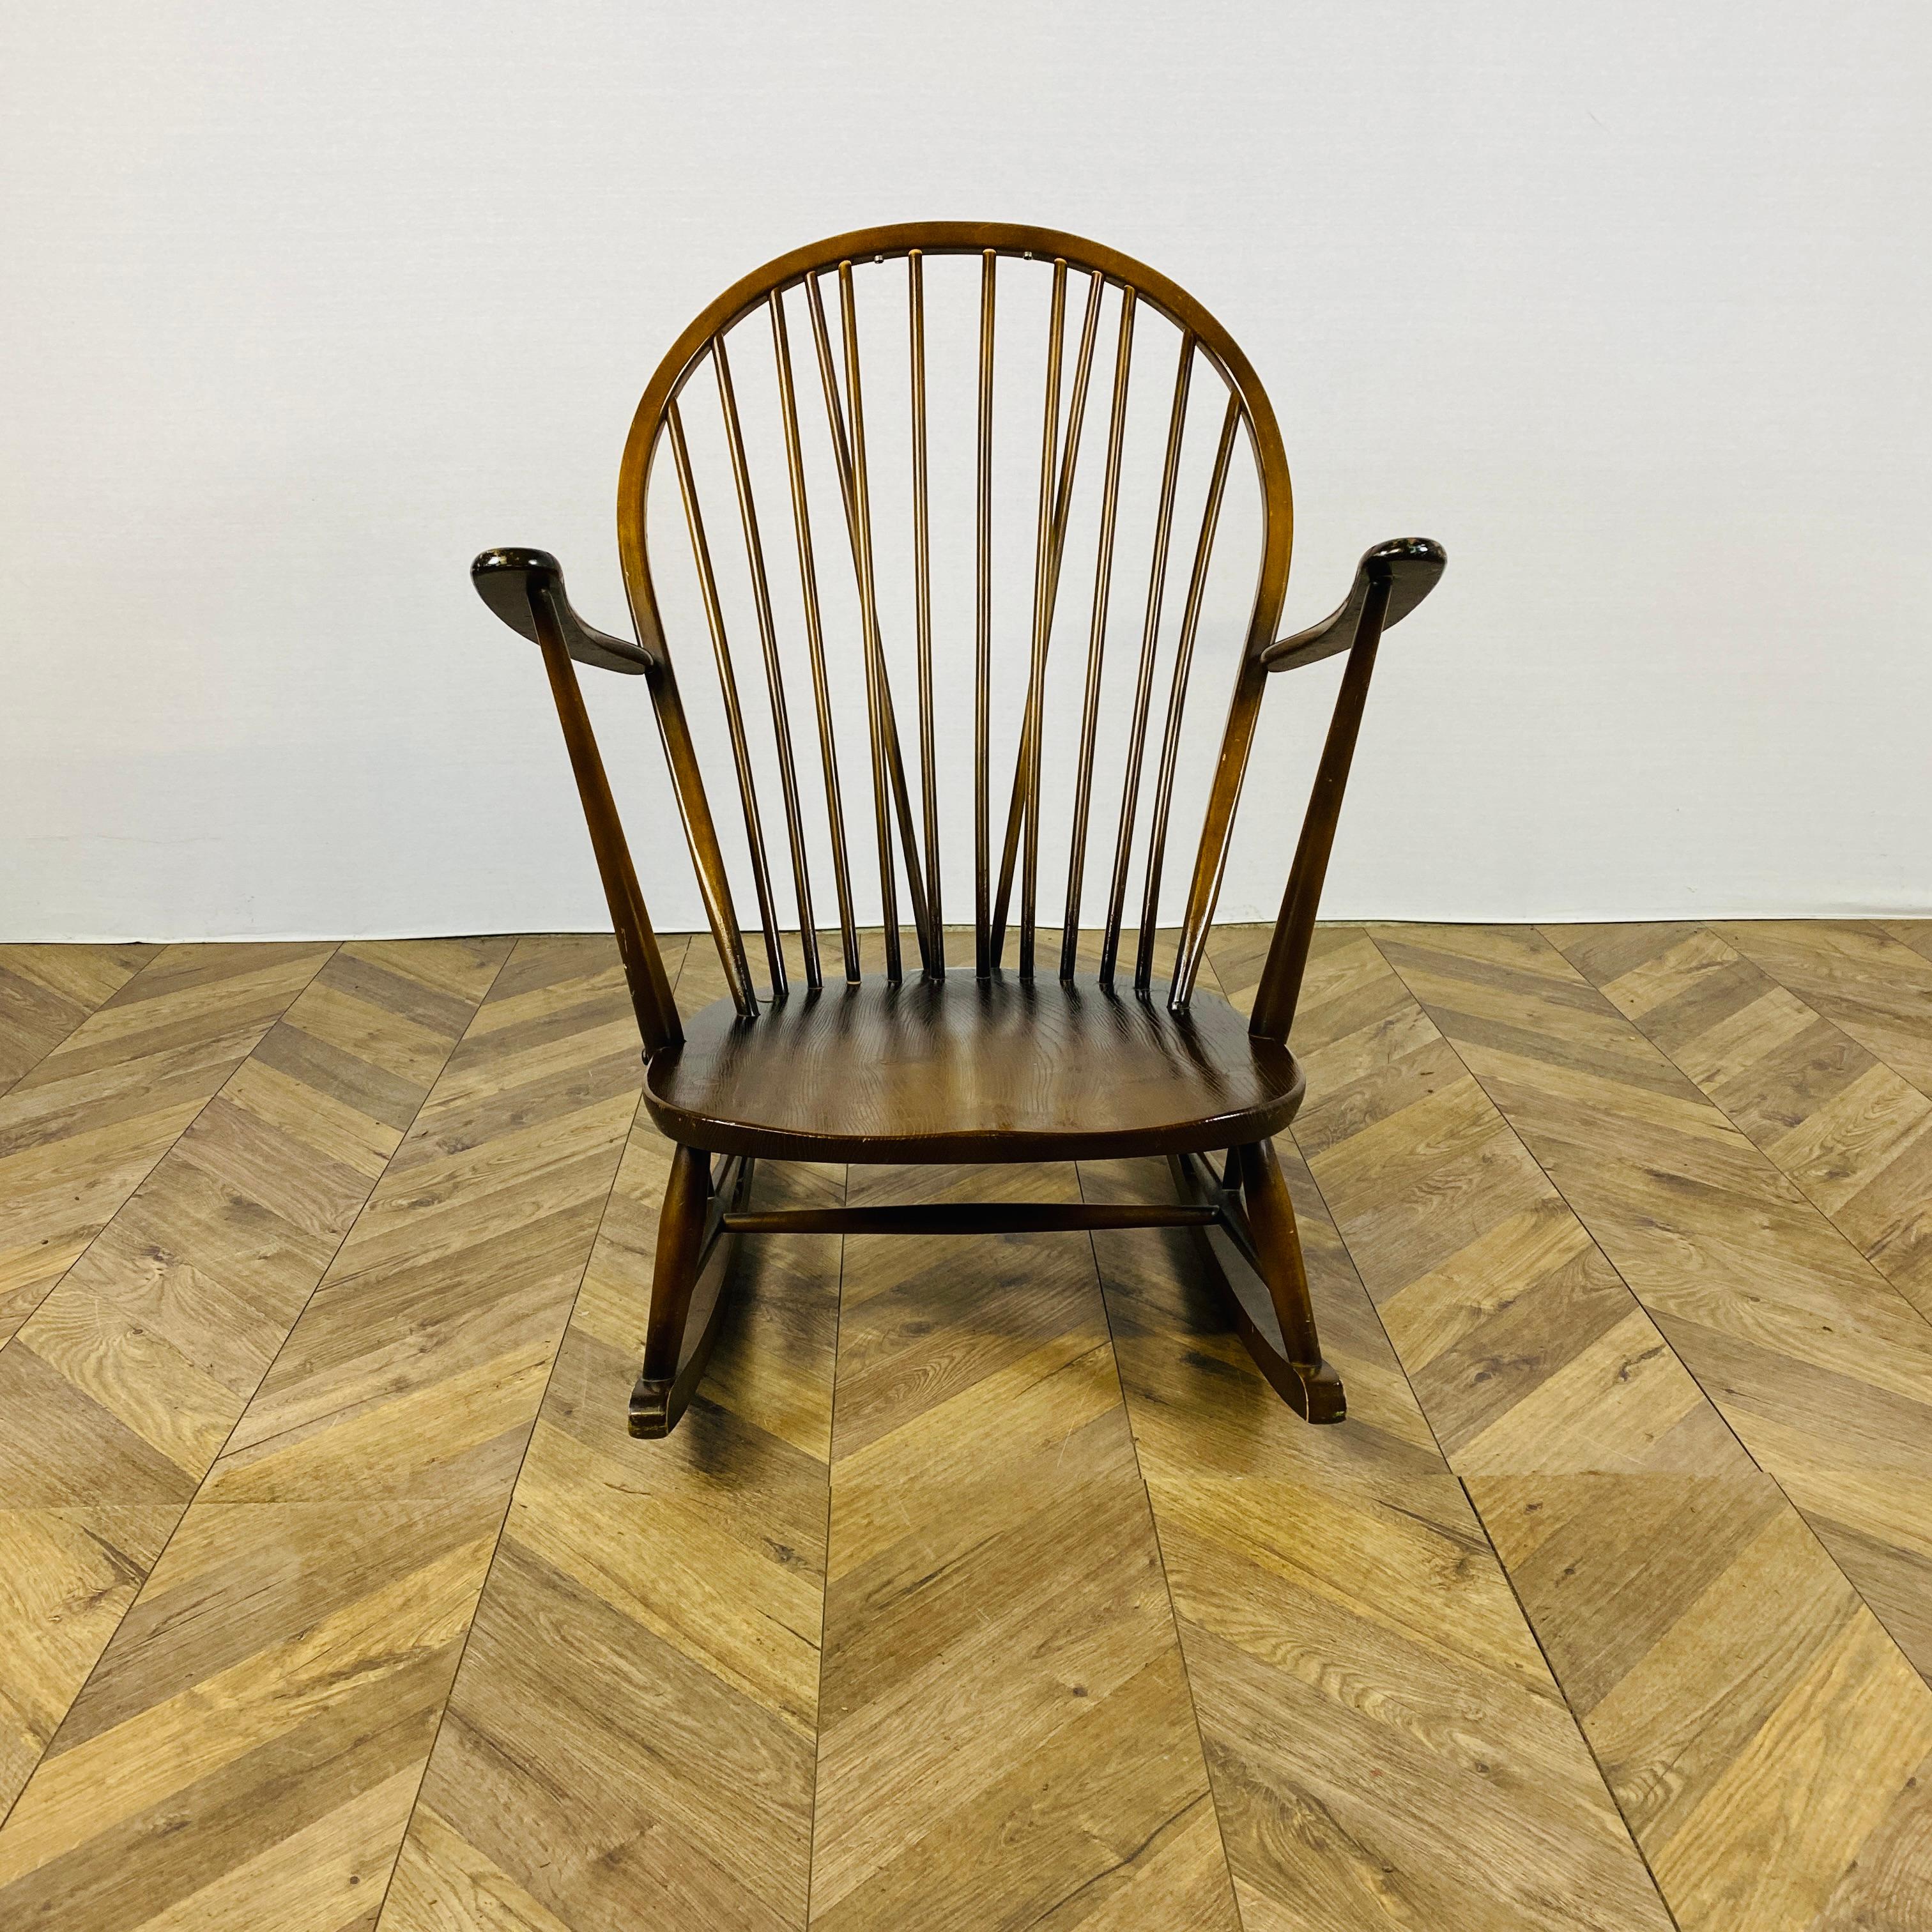 A Lovely Large Ercol Windsor Grandfather Rocking Chair Model No. 315, circa 1960’s.


Designed by Lucian Ercolani, the rocking chair seamlessly blend contemporary British design and traditional craftsmanship. 

The chairs are made from solid